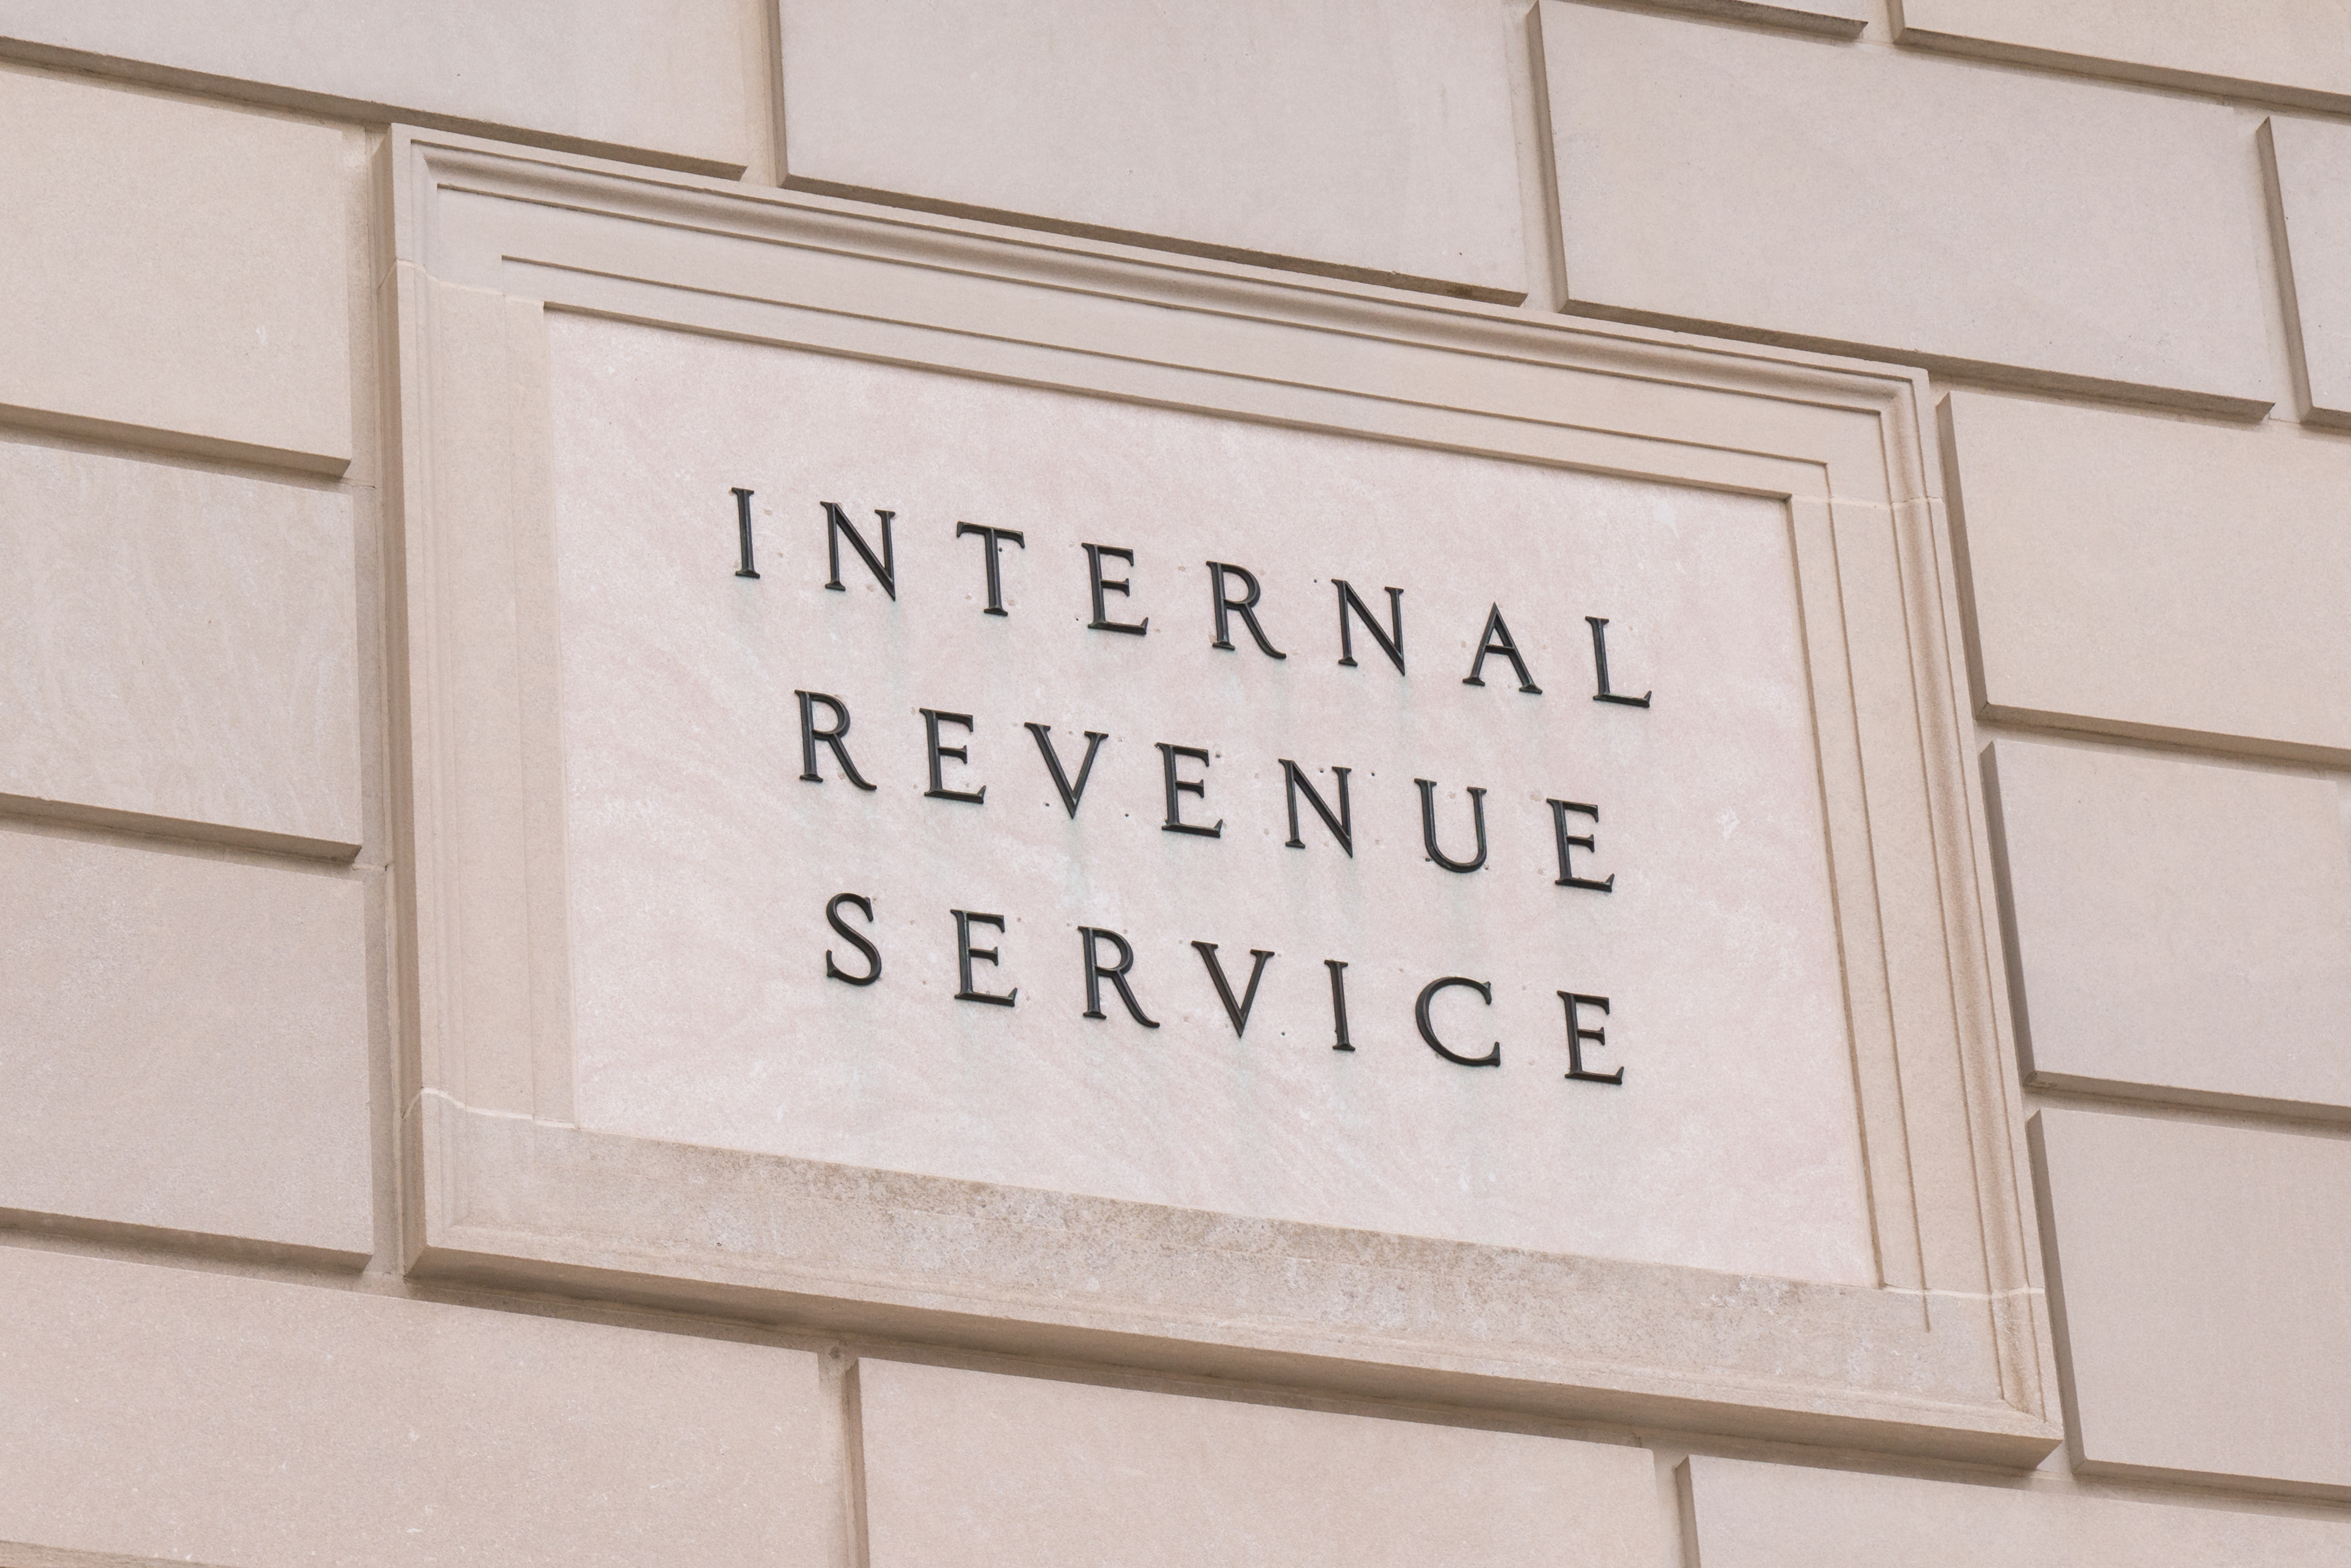 Latest IRS 174 Amortization Guidance Confirms Taxpayer-Friendly Mitigation Measures - BRAYN Consulting LLC